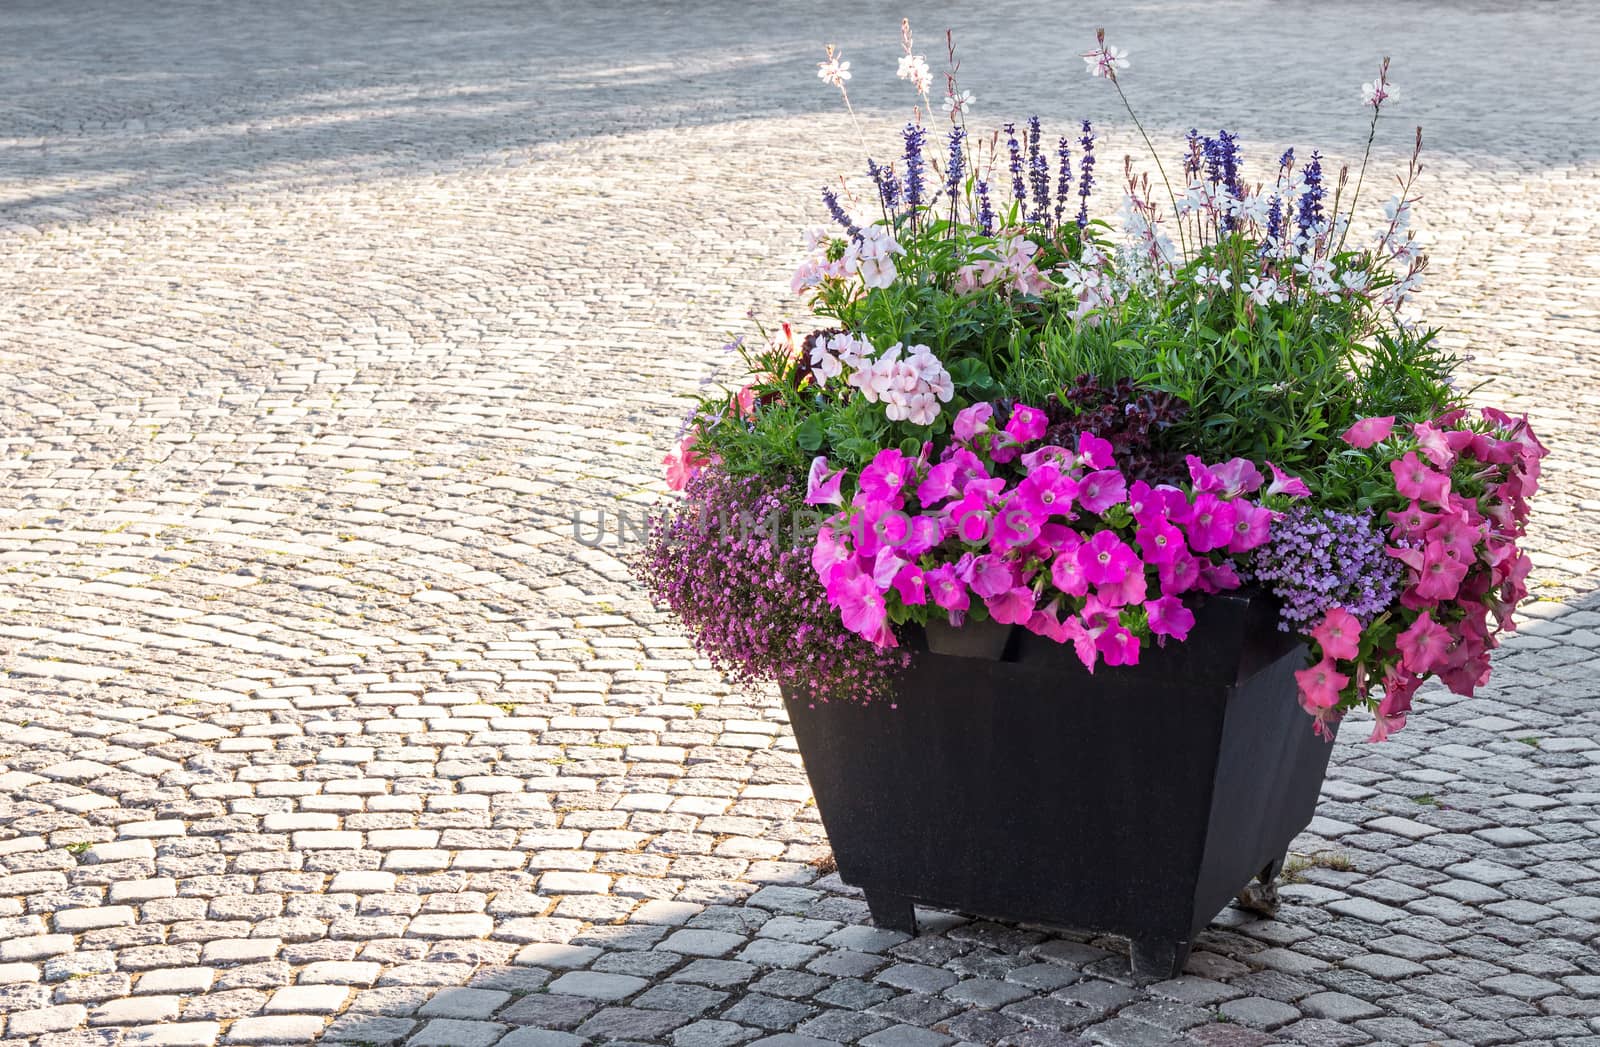 Flowers decorating a city square in sunlight.